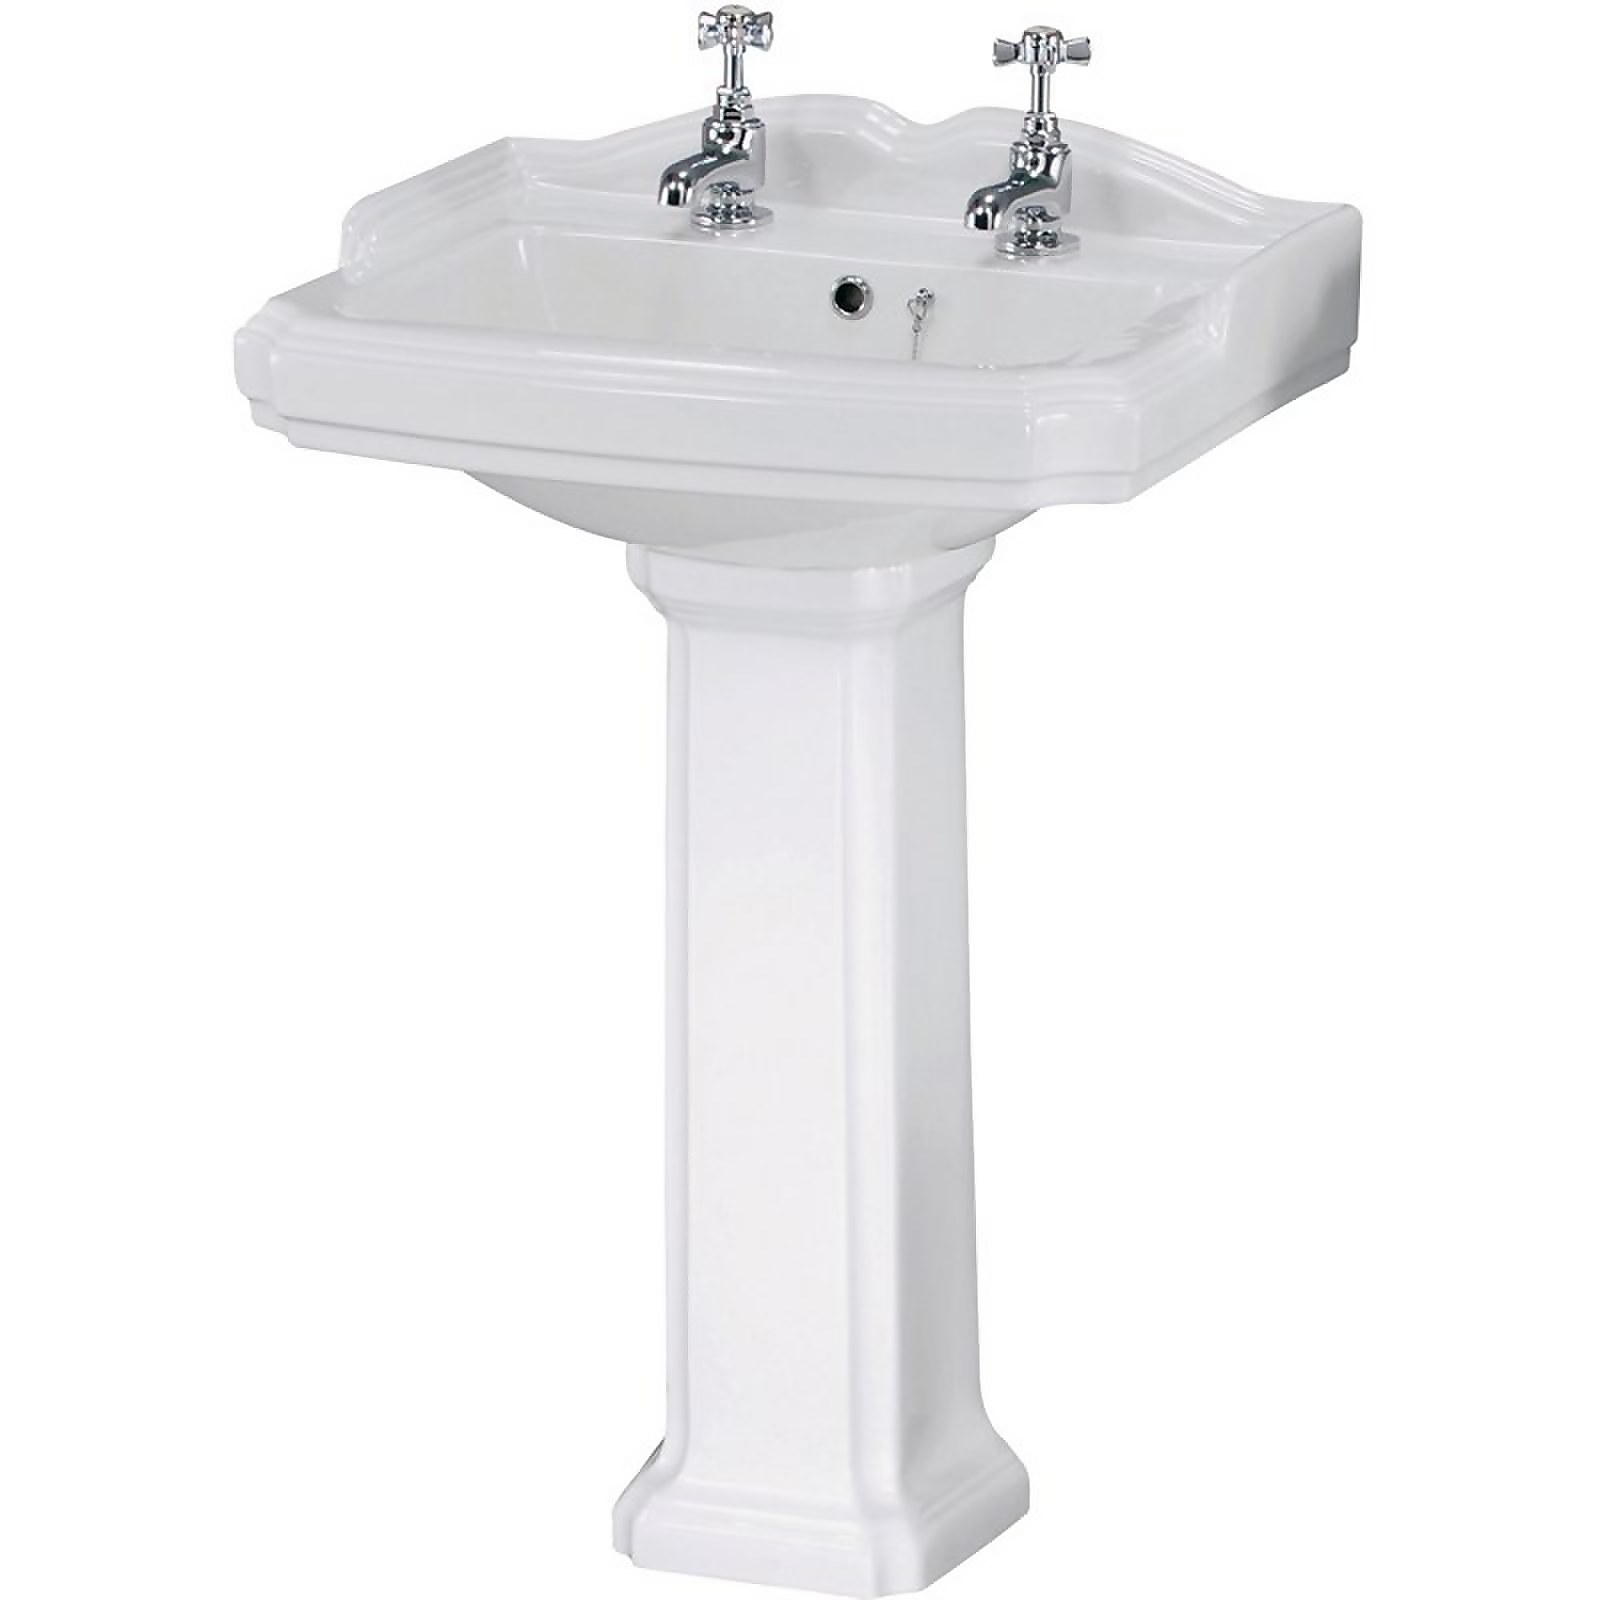 Photo of Balterley Legacy 2 Tap Hole Basin And Full Pedestal - 580mm